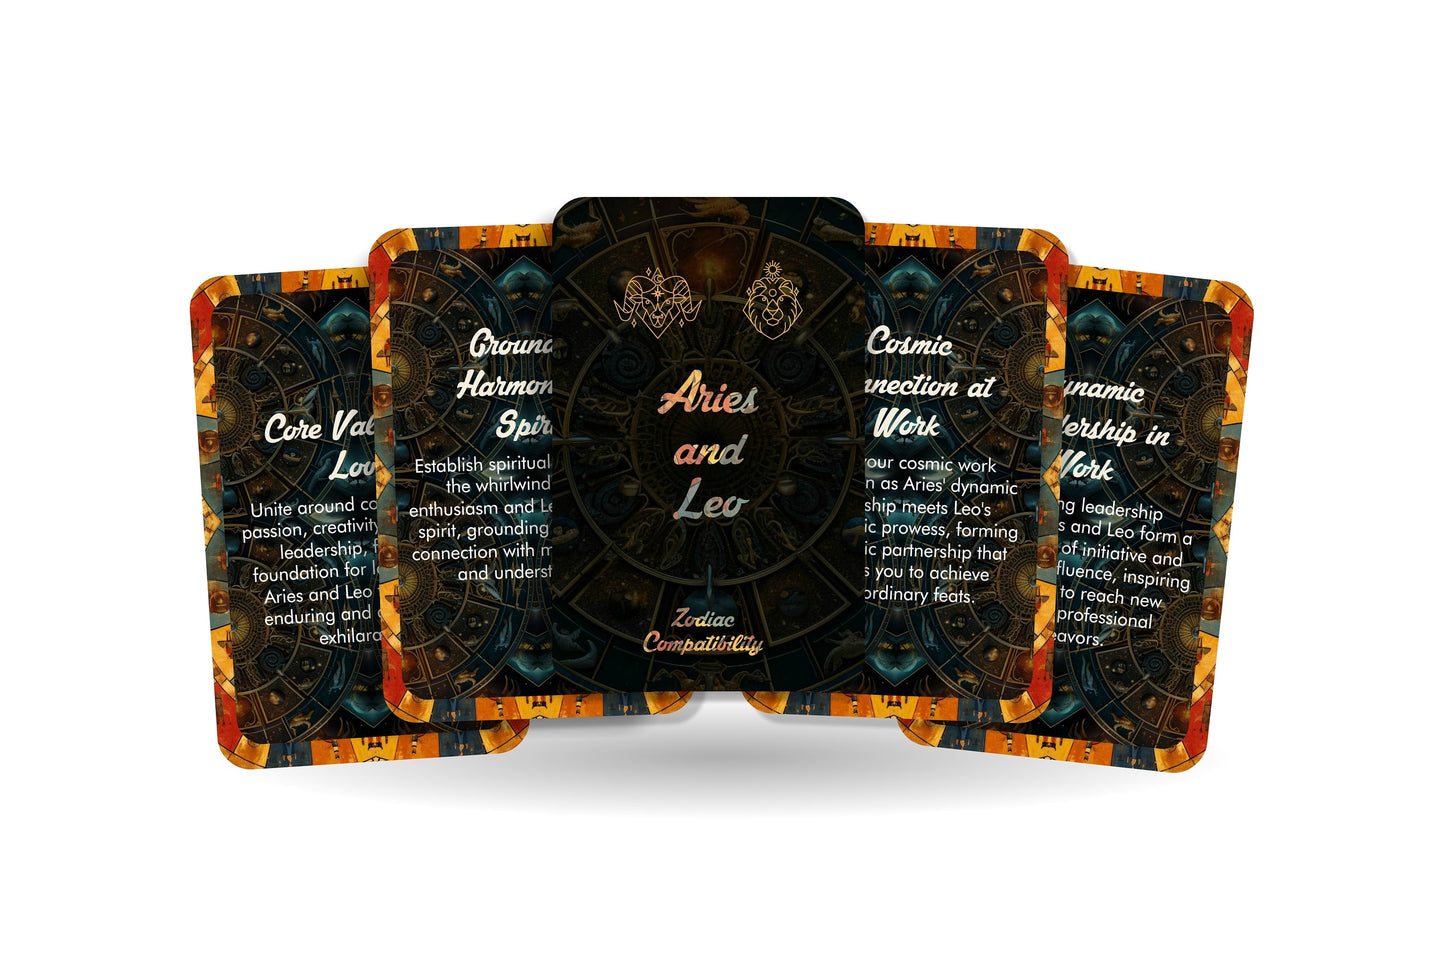 Aries and Leo - Zodiac Compatibility - Divination tools - Oracle cards - Star Sign Compatibility - Horoscope Compatibility Cards